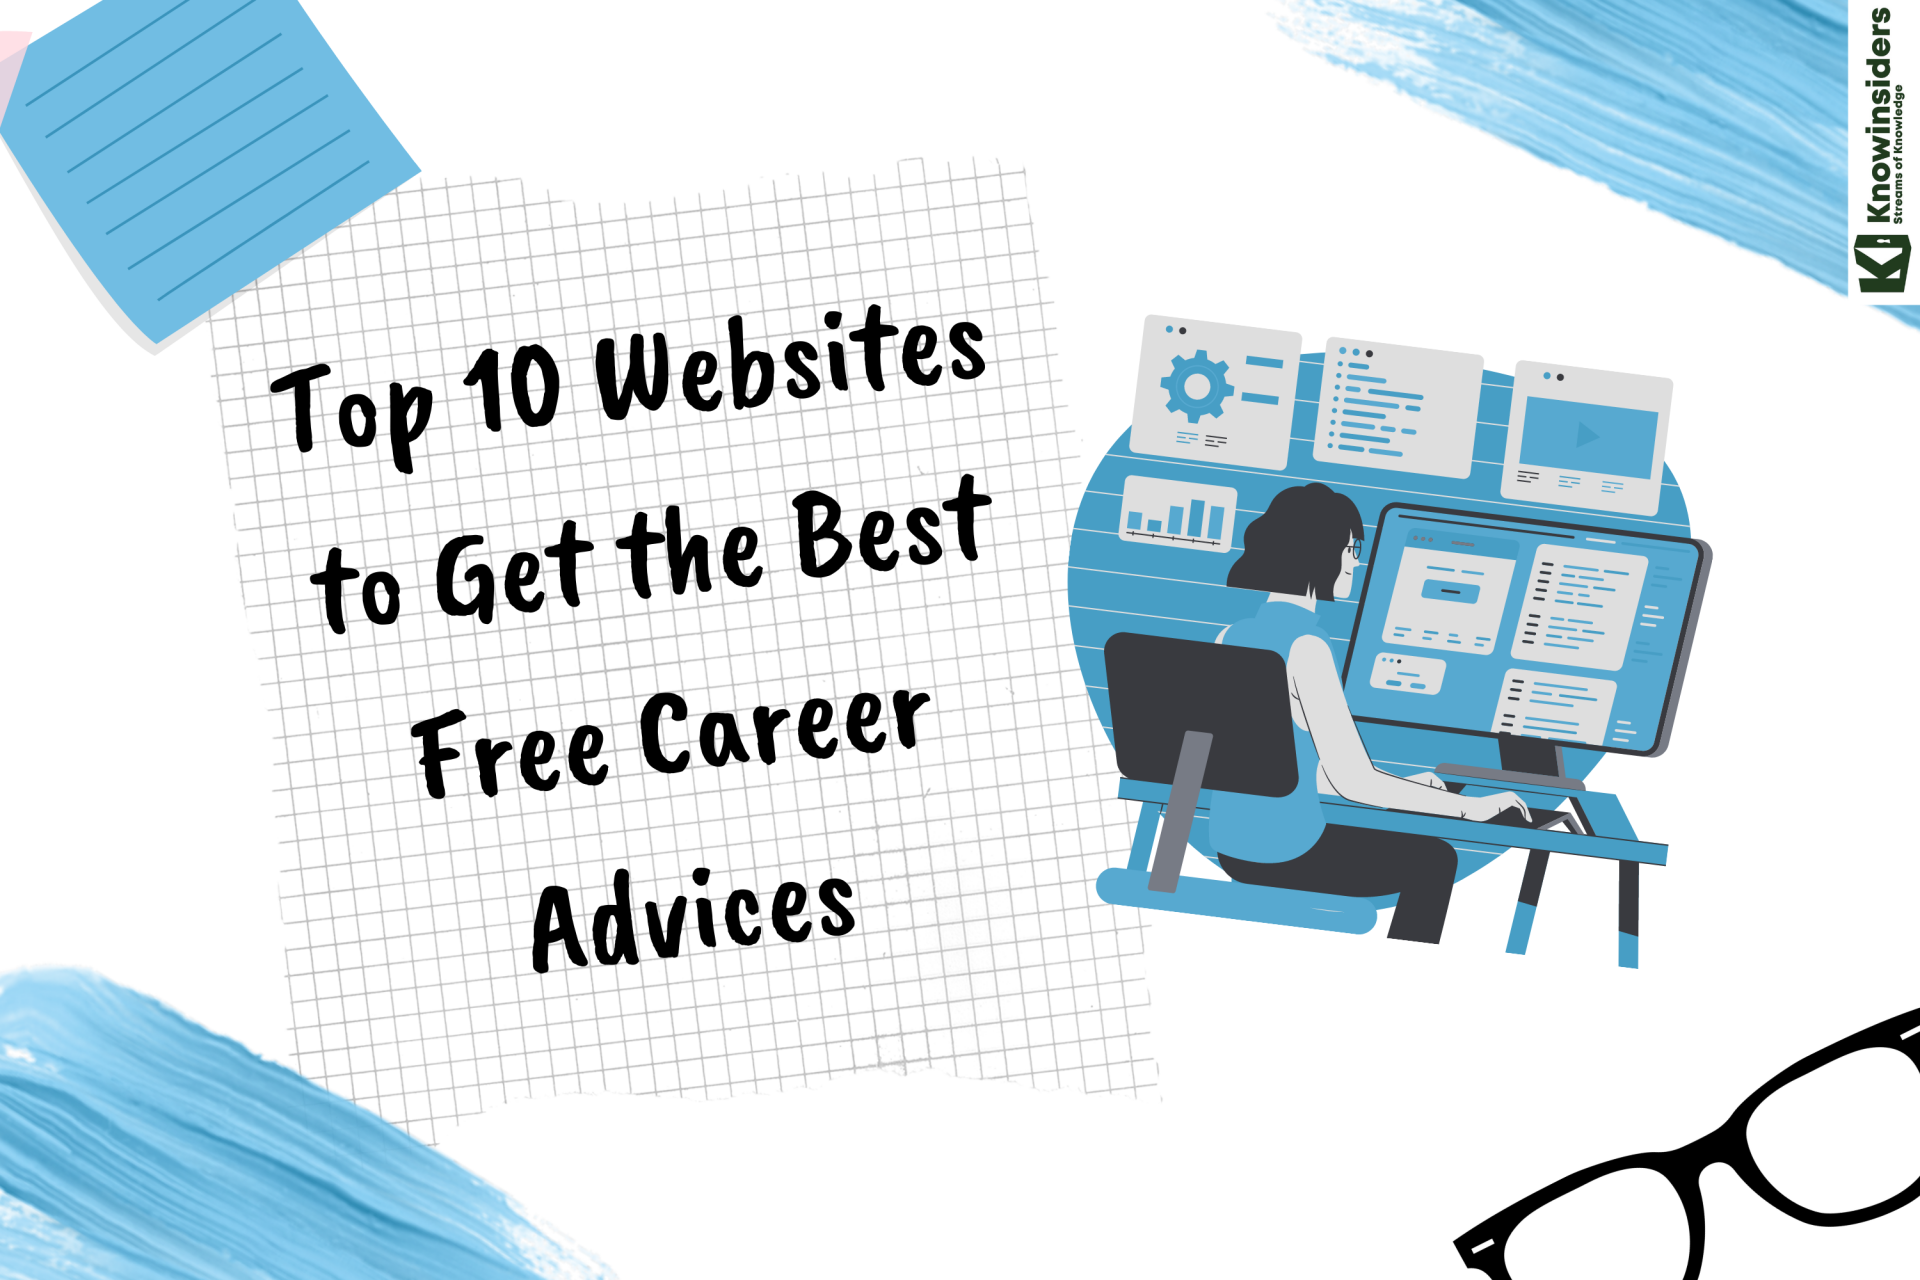 Top 10 Websites to Get the Best Free Career Advices